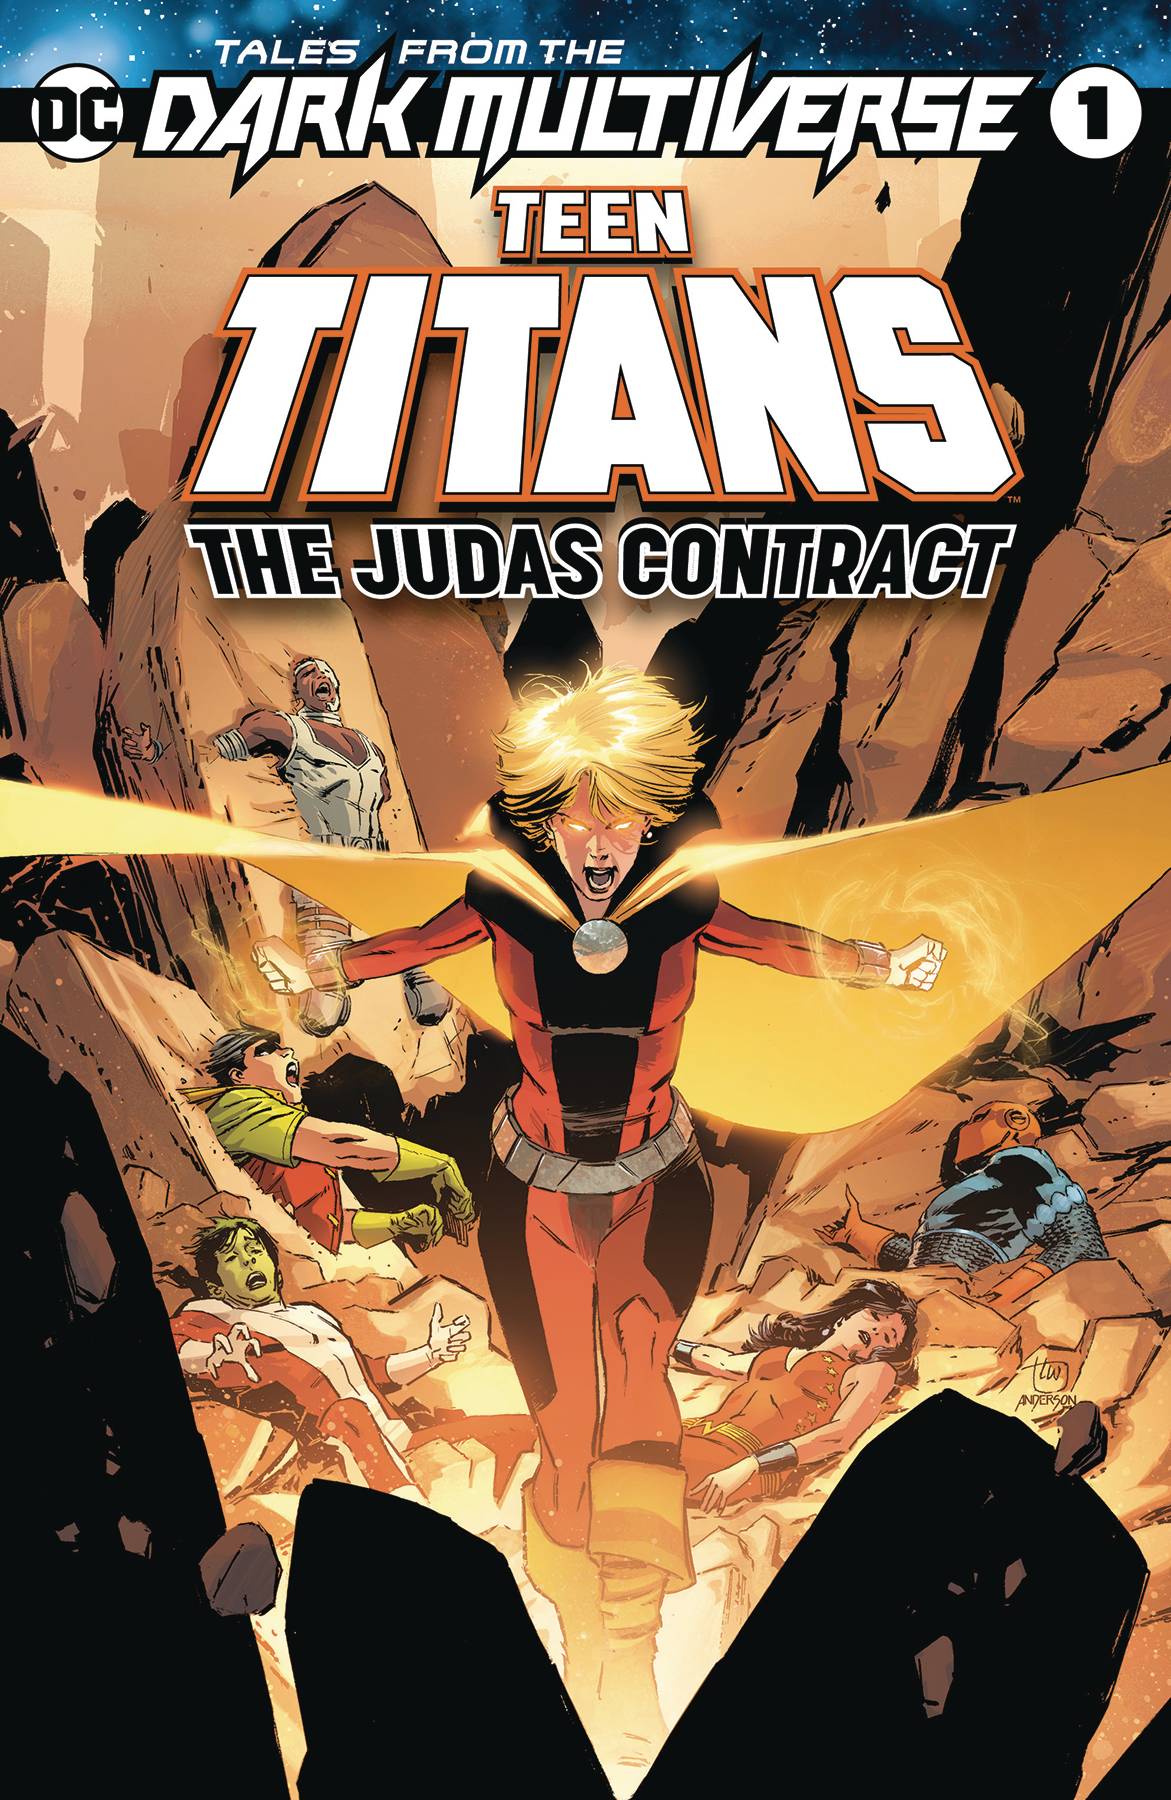 TALES FROM THE DARK MULTIVERSE THE JUDAS CONTRACT #1 12/04/19 FOC 11/11/19